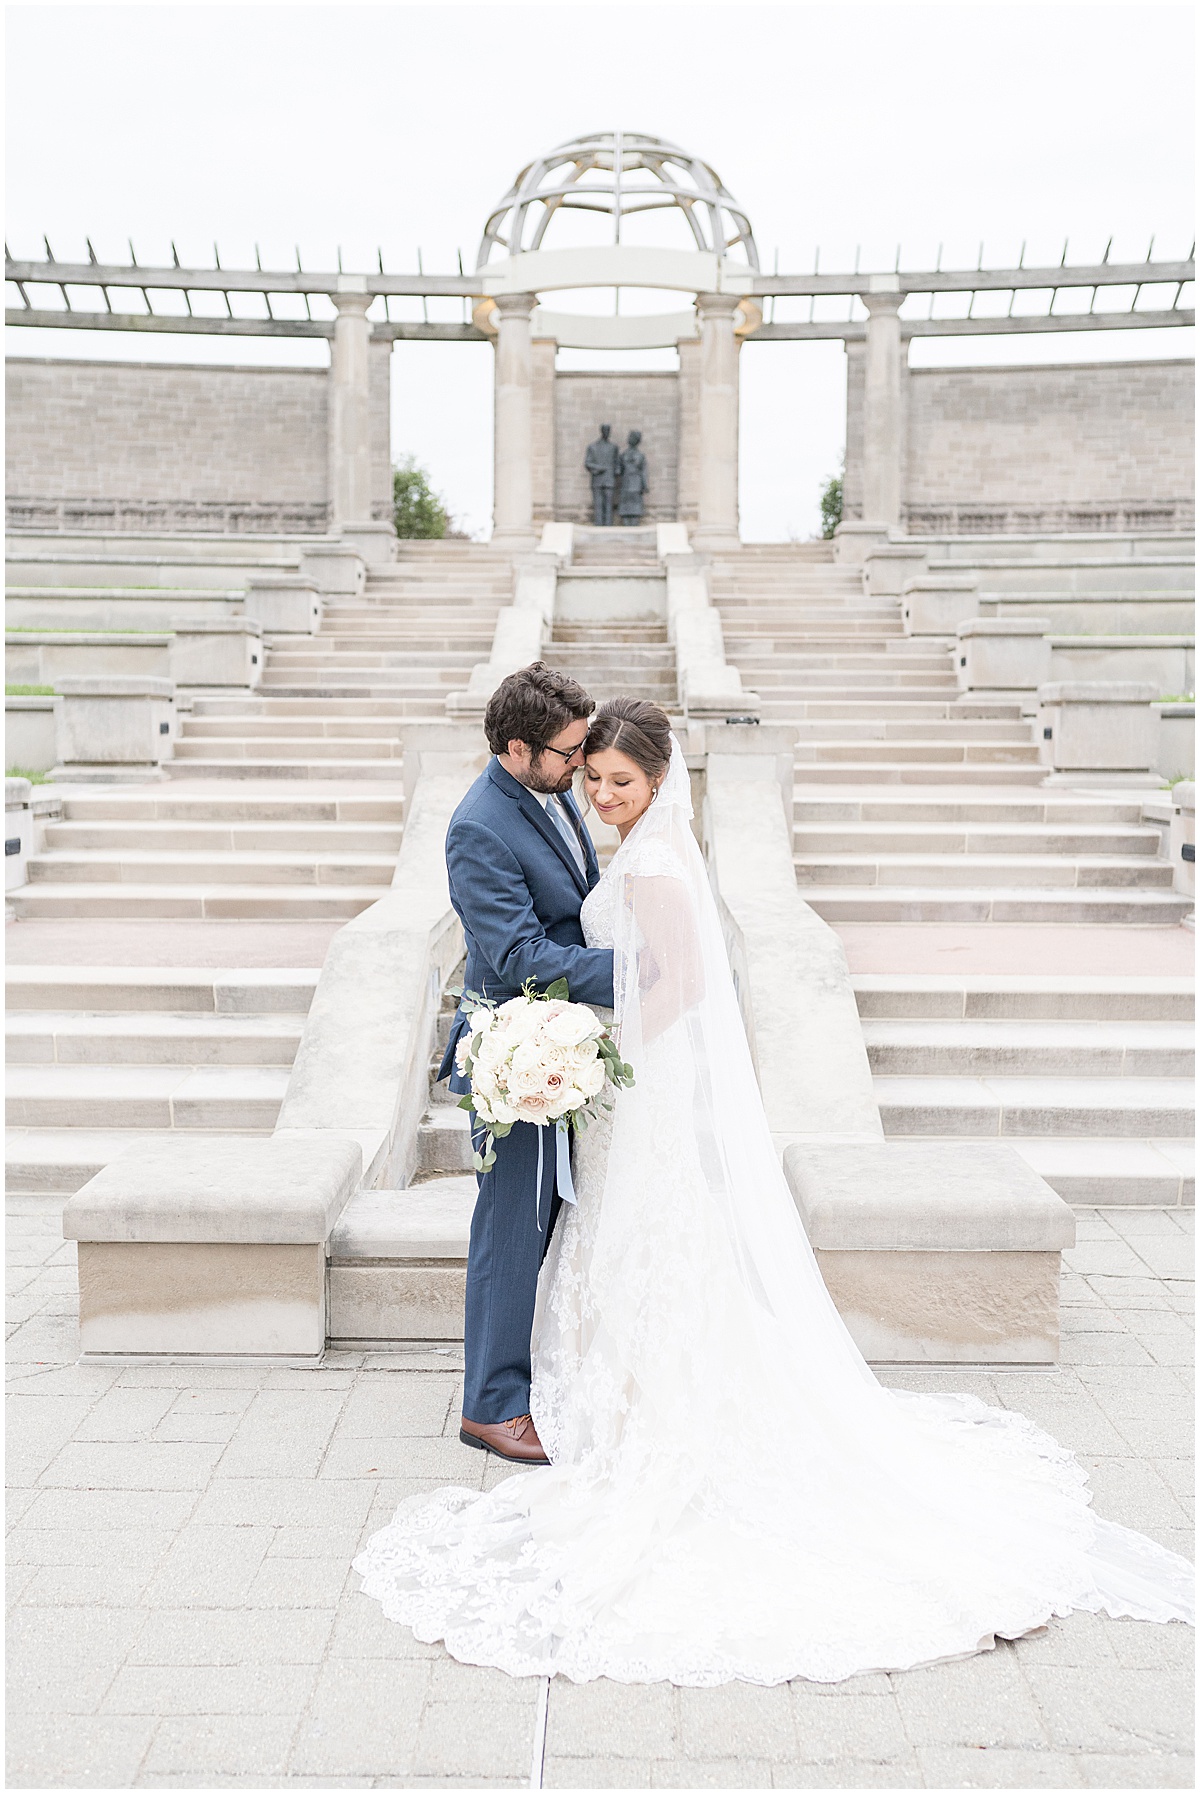 Newlyweds on steps at Coxhall Gardens in Carmel, Indiana